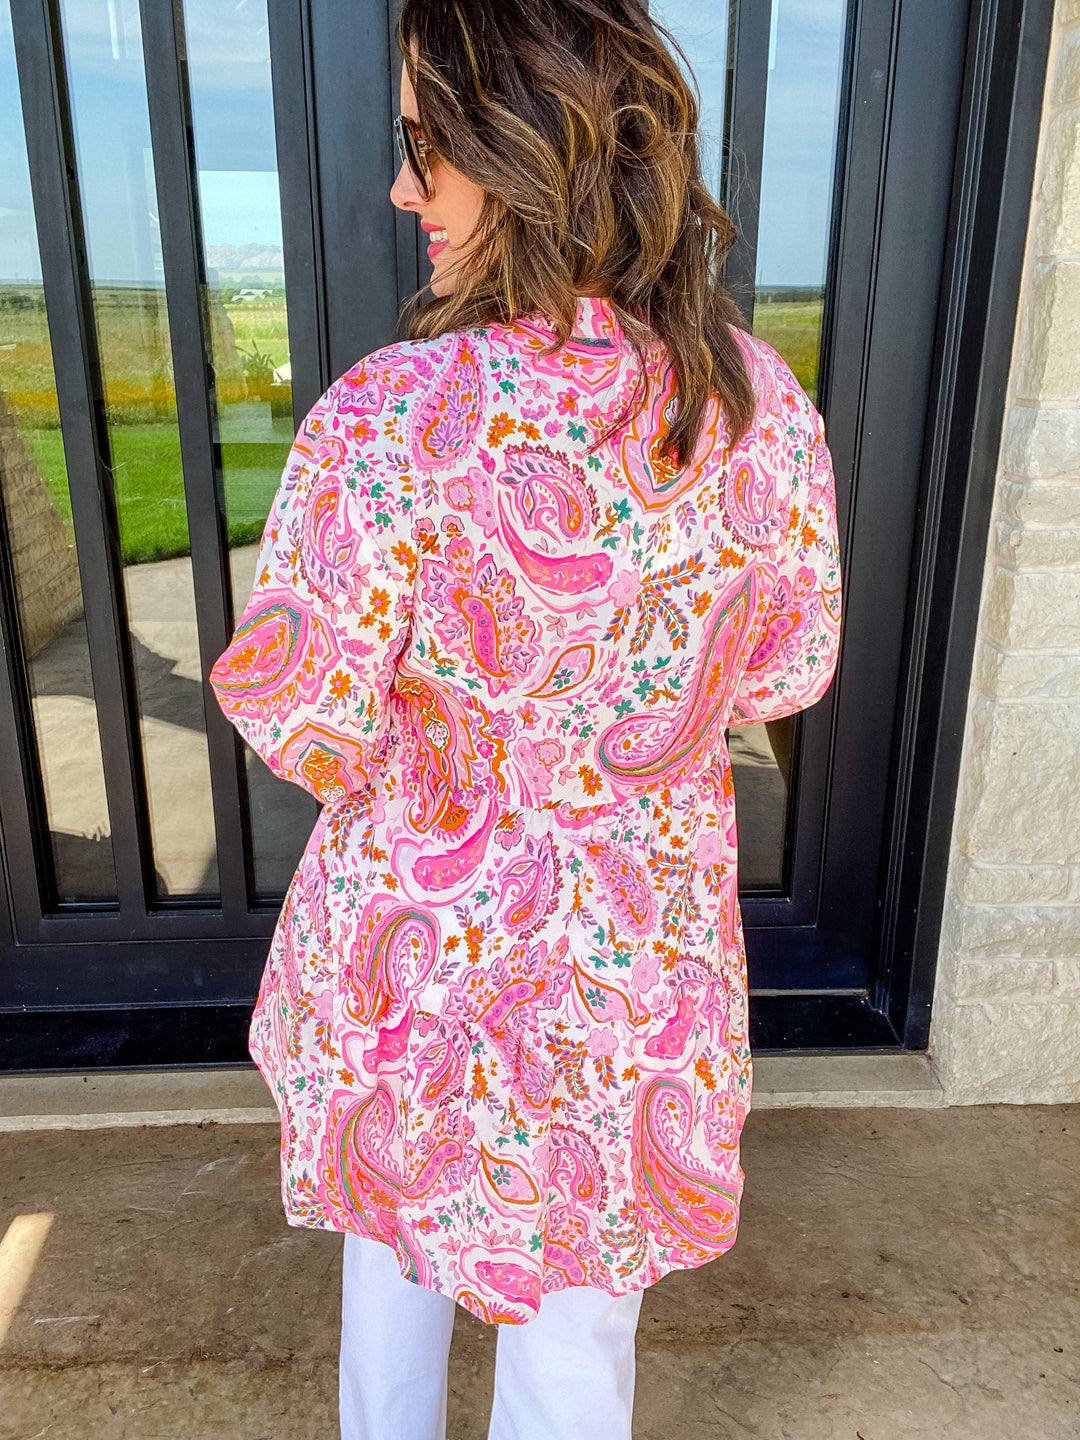 Pink Mix Paisley Print Tiered 3/4 Sleeve Top by Umgee